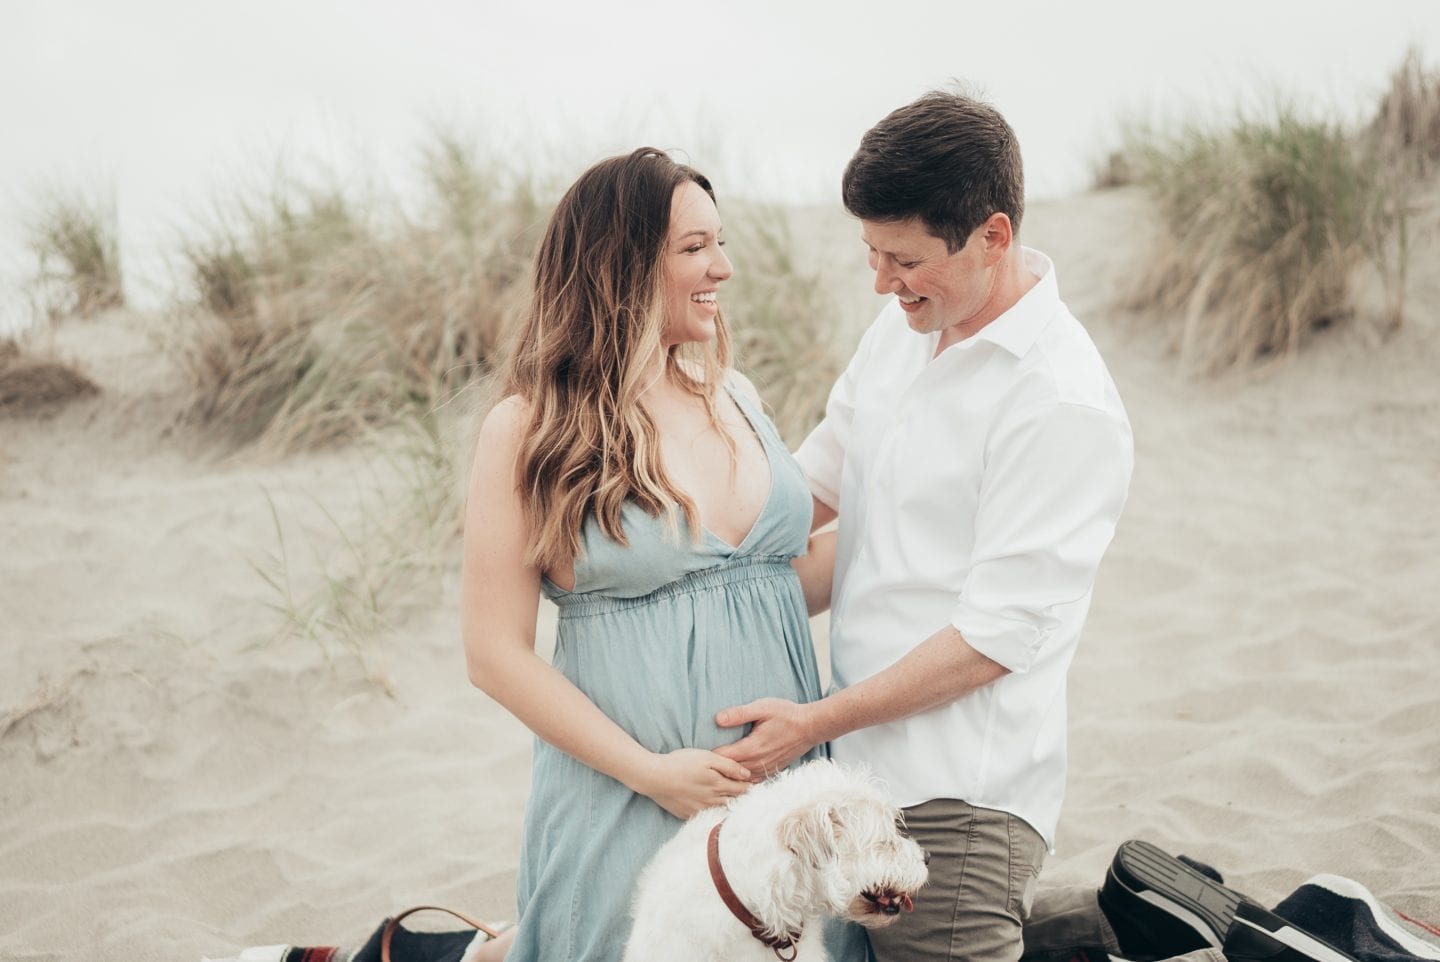 Maternity Style for Each Trimester by popular California fashion blog, Just Add Glam: image of a husband and wife doing a maternity shoot on a beach.